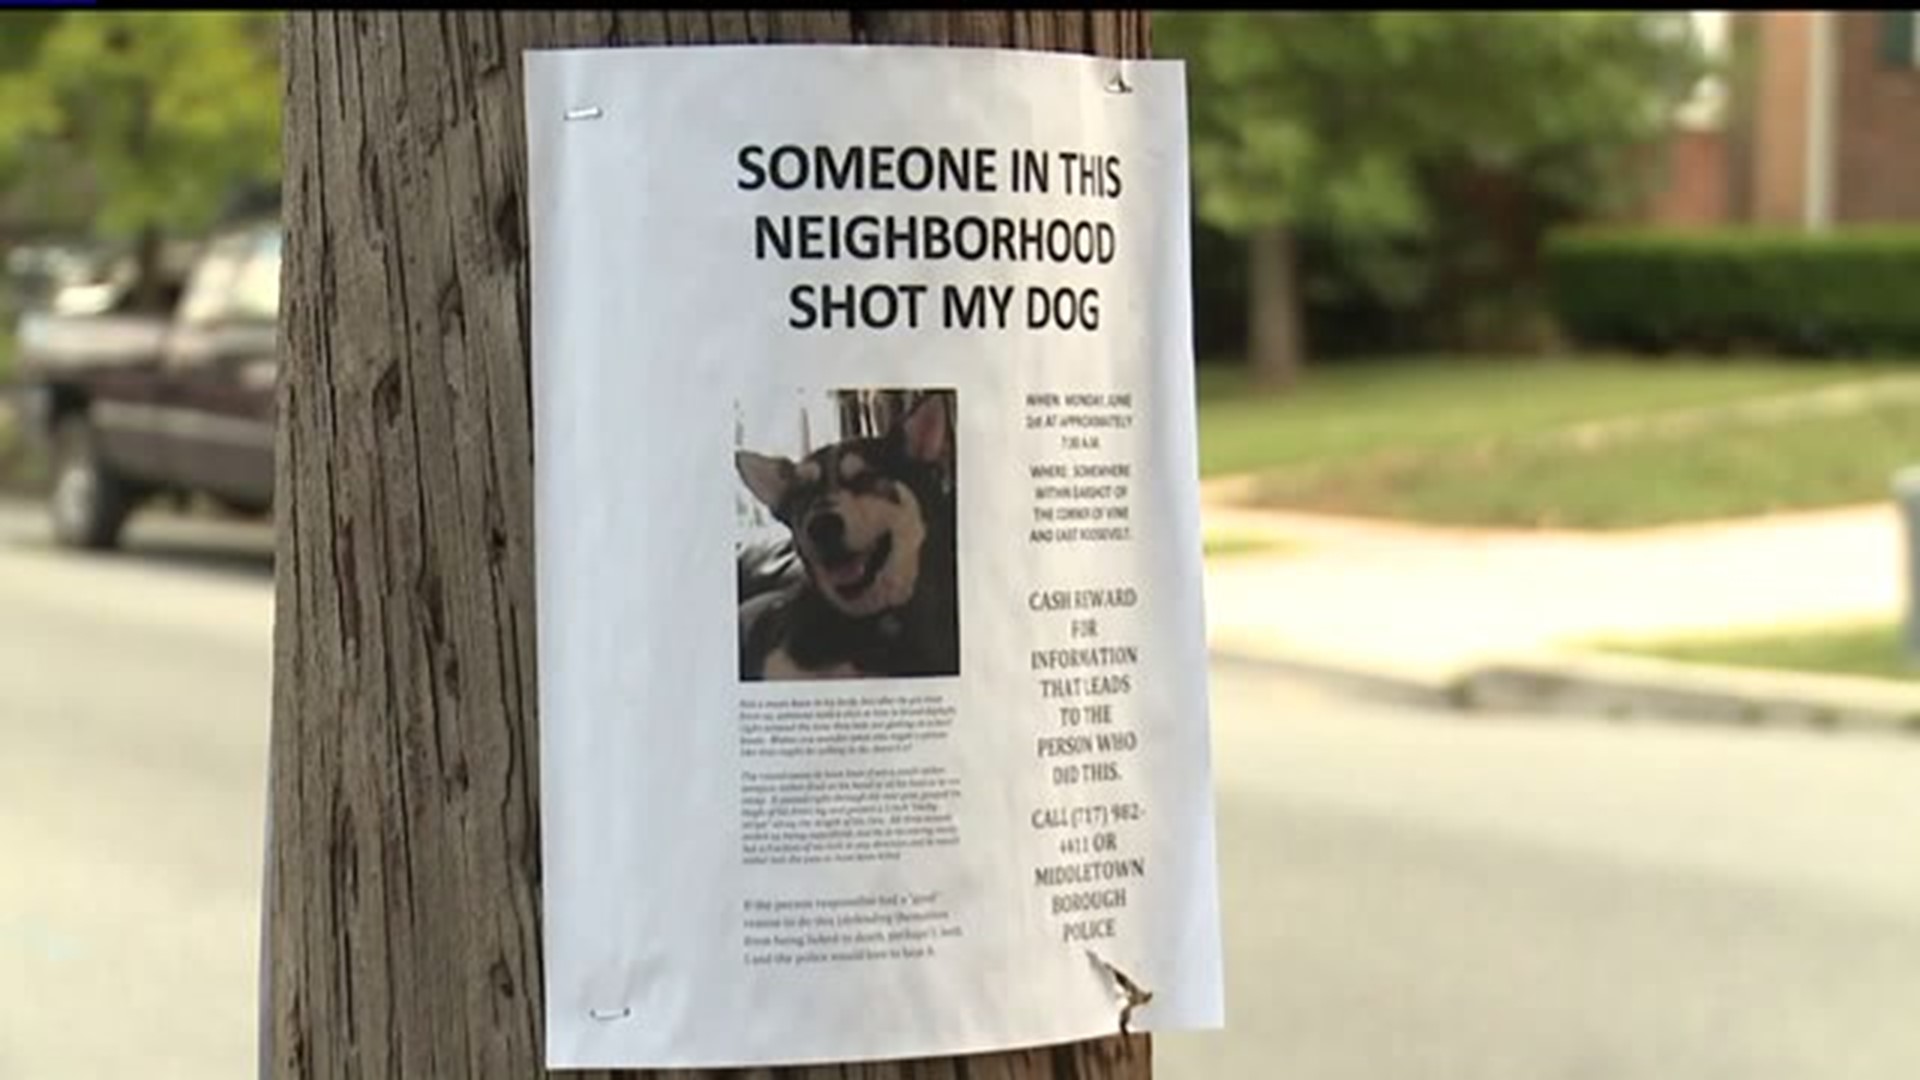 Police in Middletown are investigating after a family`s dog is shot